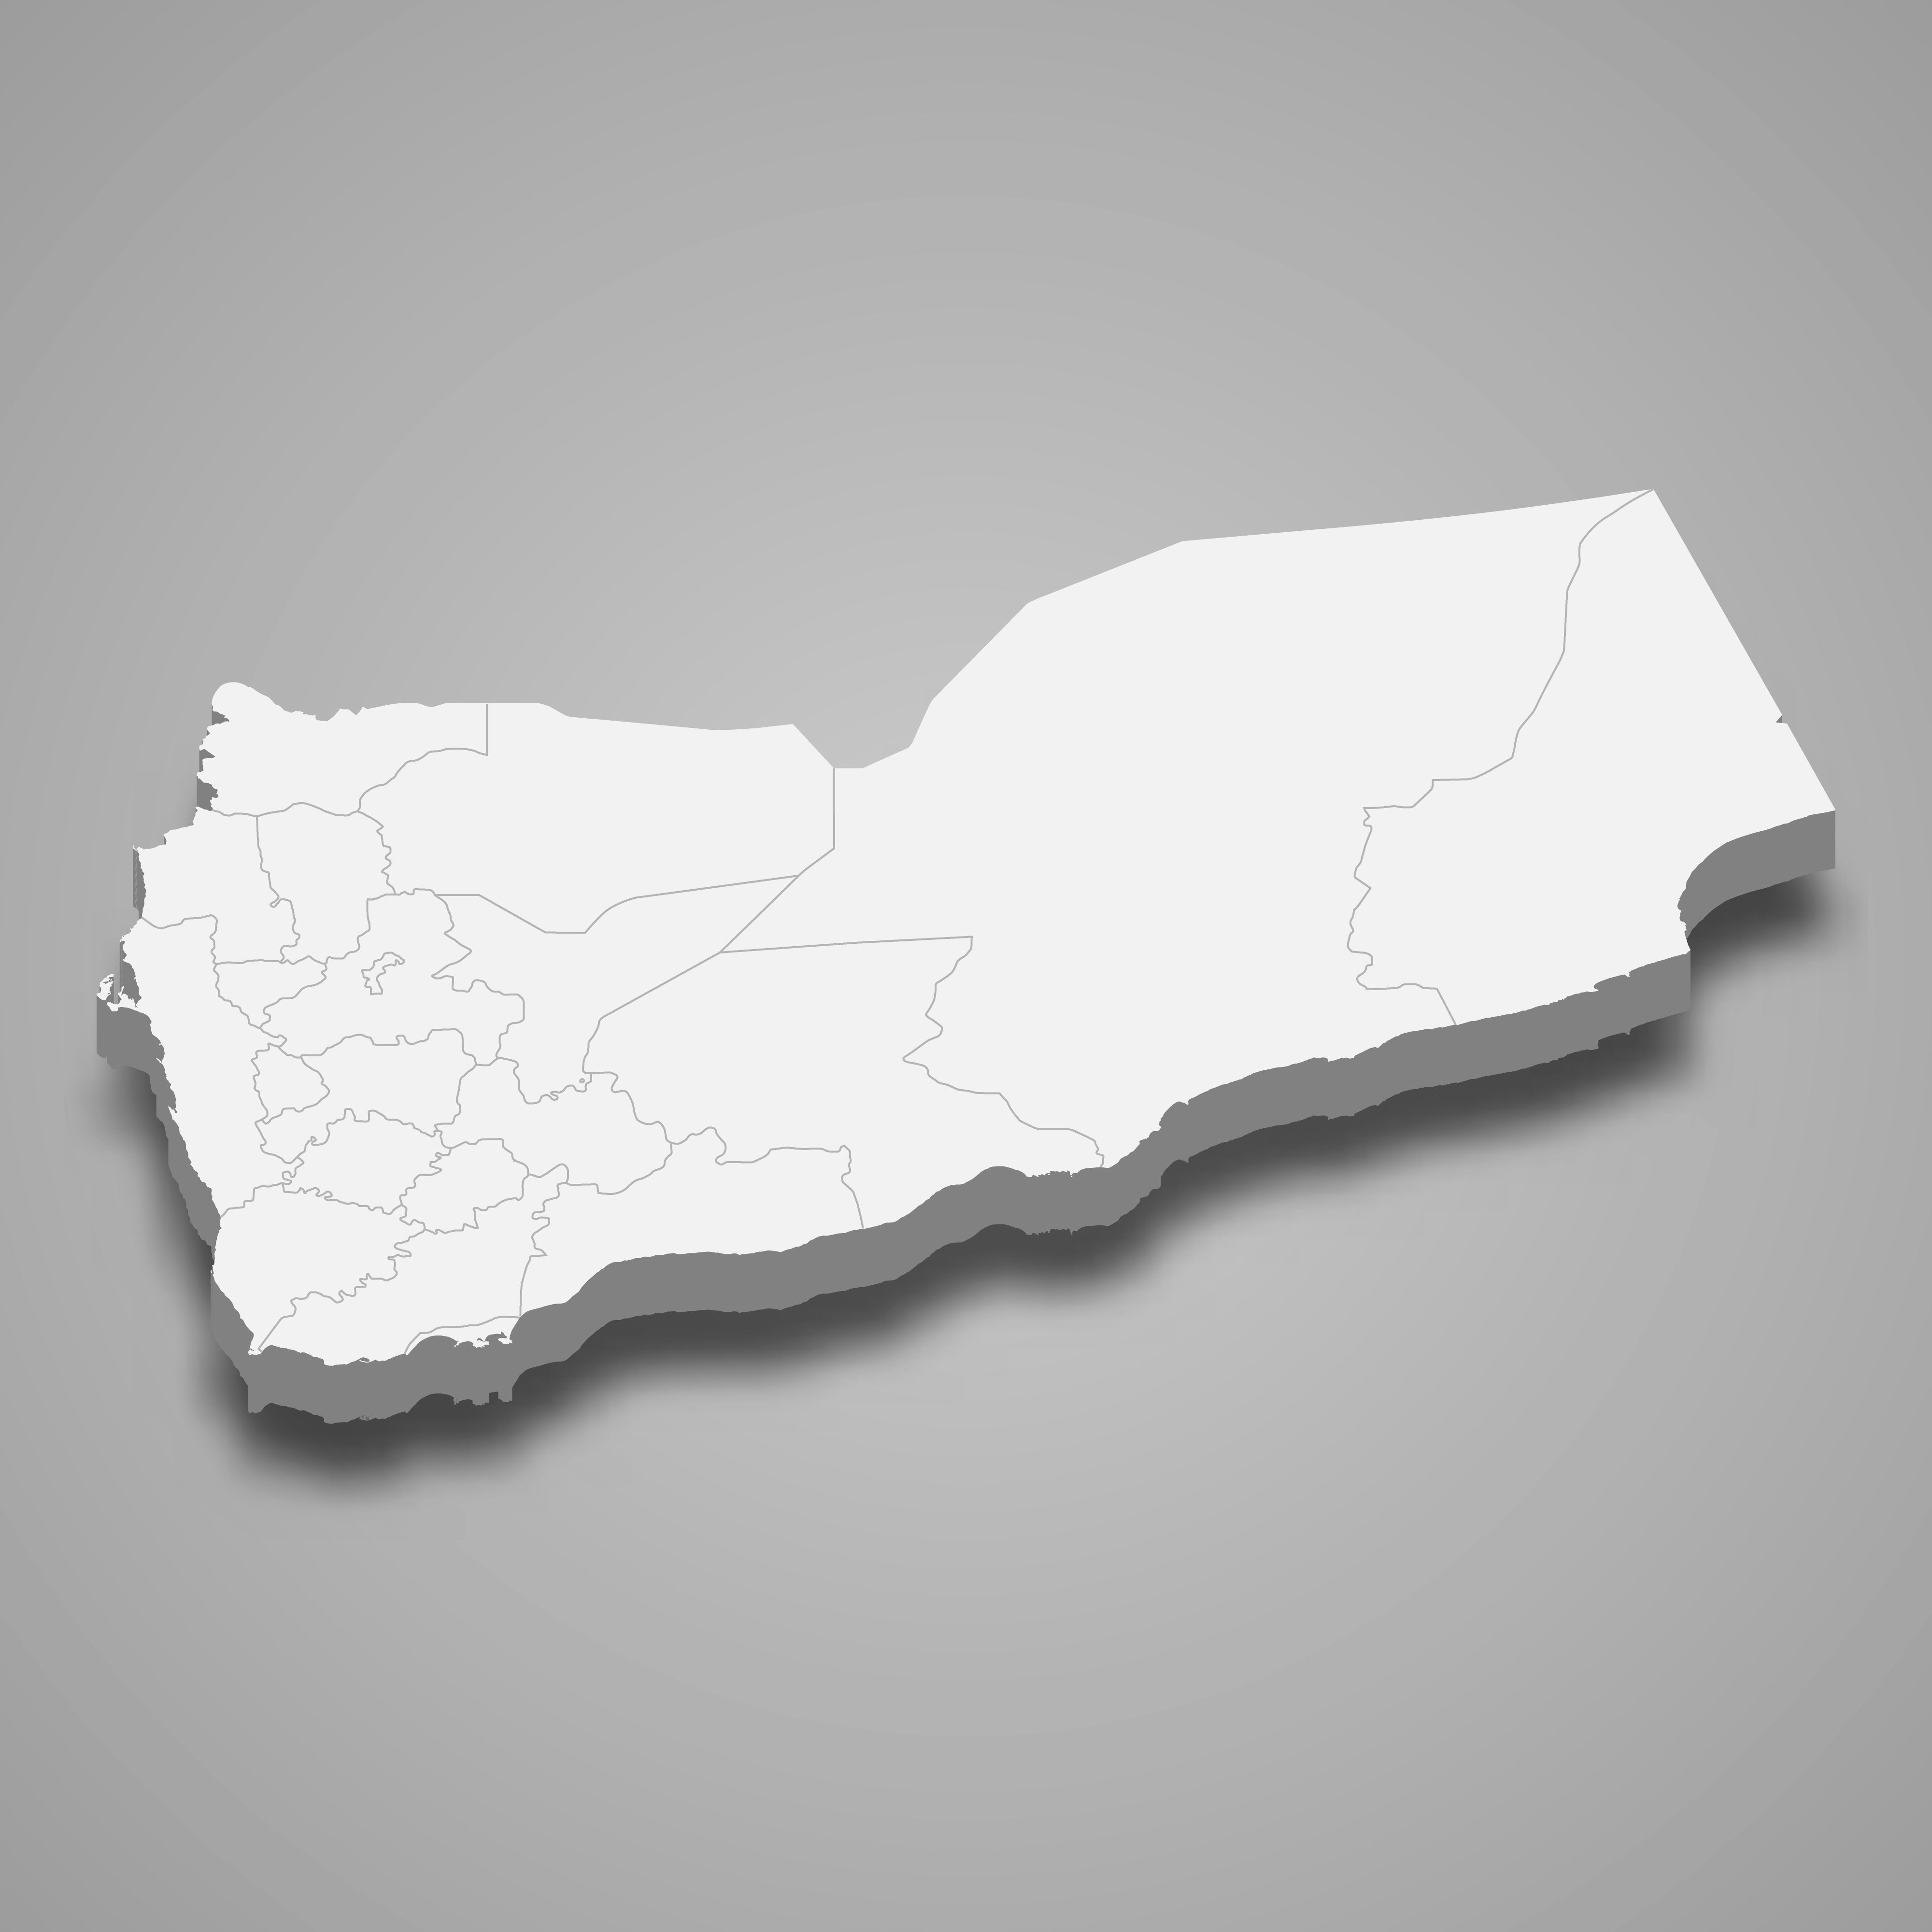 3d map of Yemen with borders of regions. 3d map with borders Template for your design